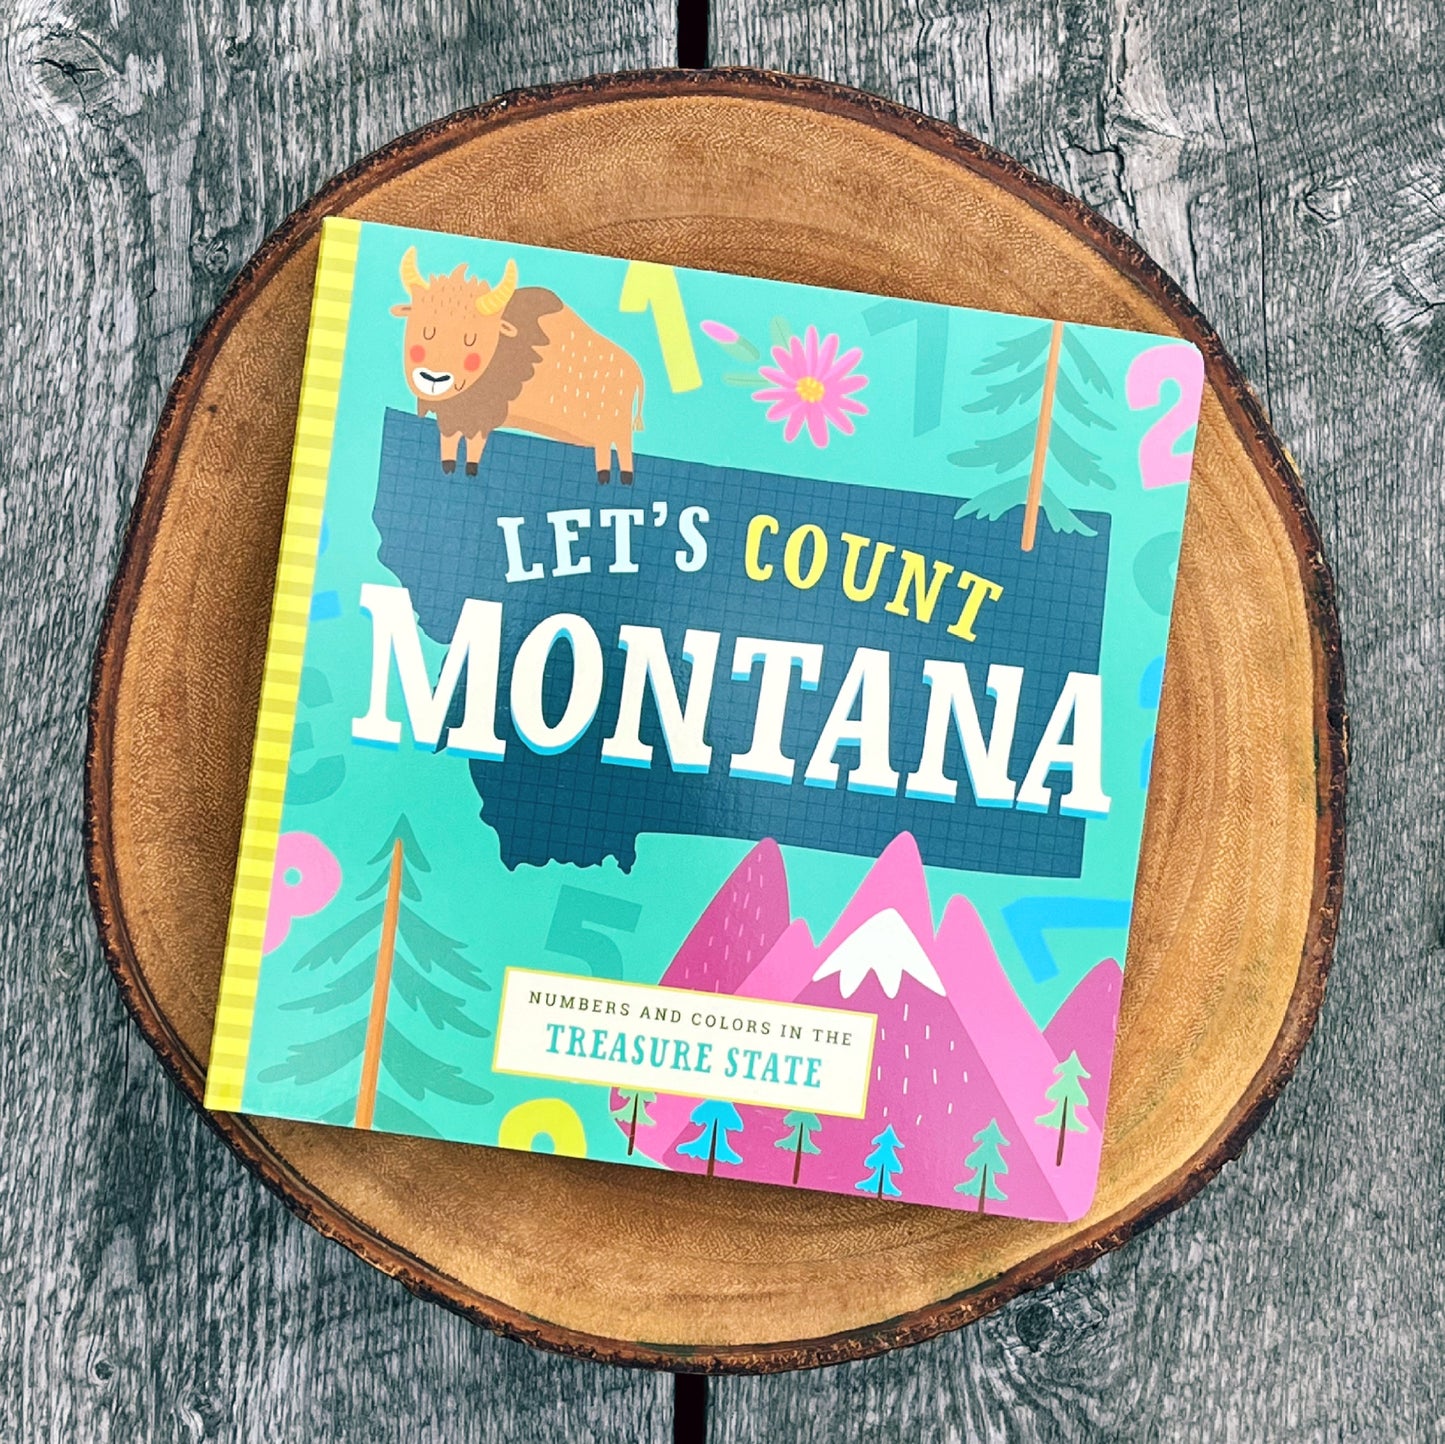 LET'S COUNT MONTANA